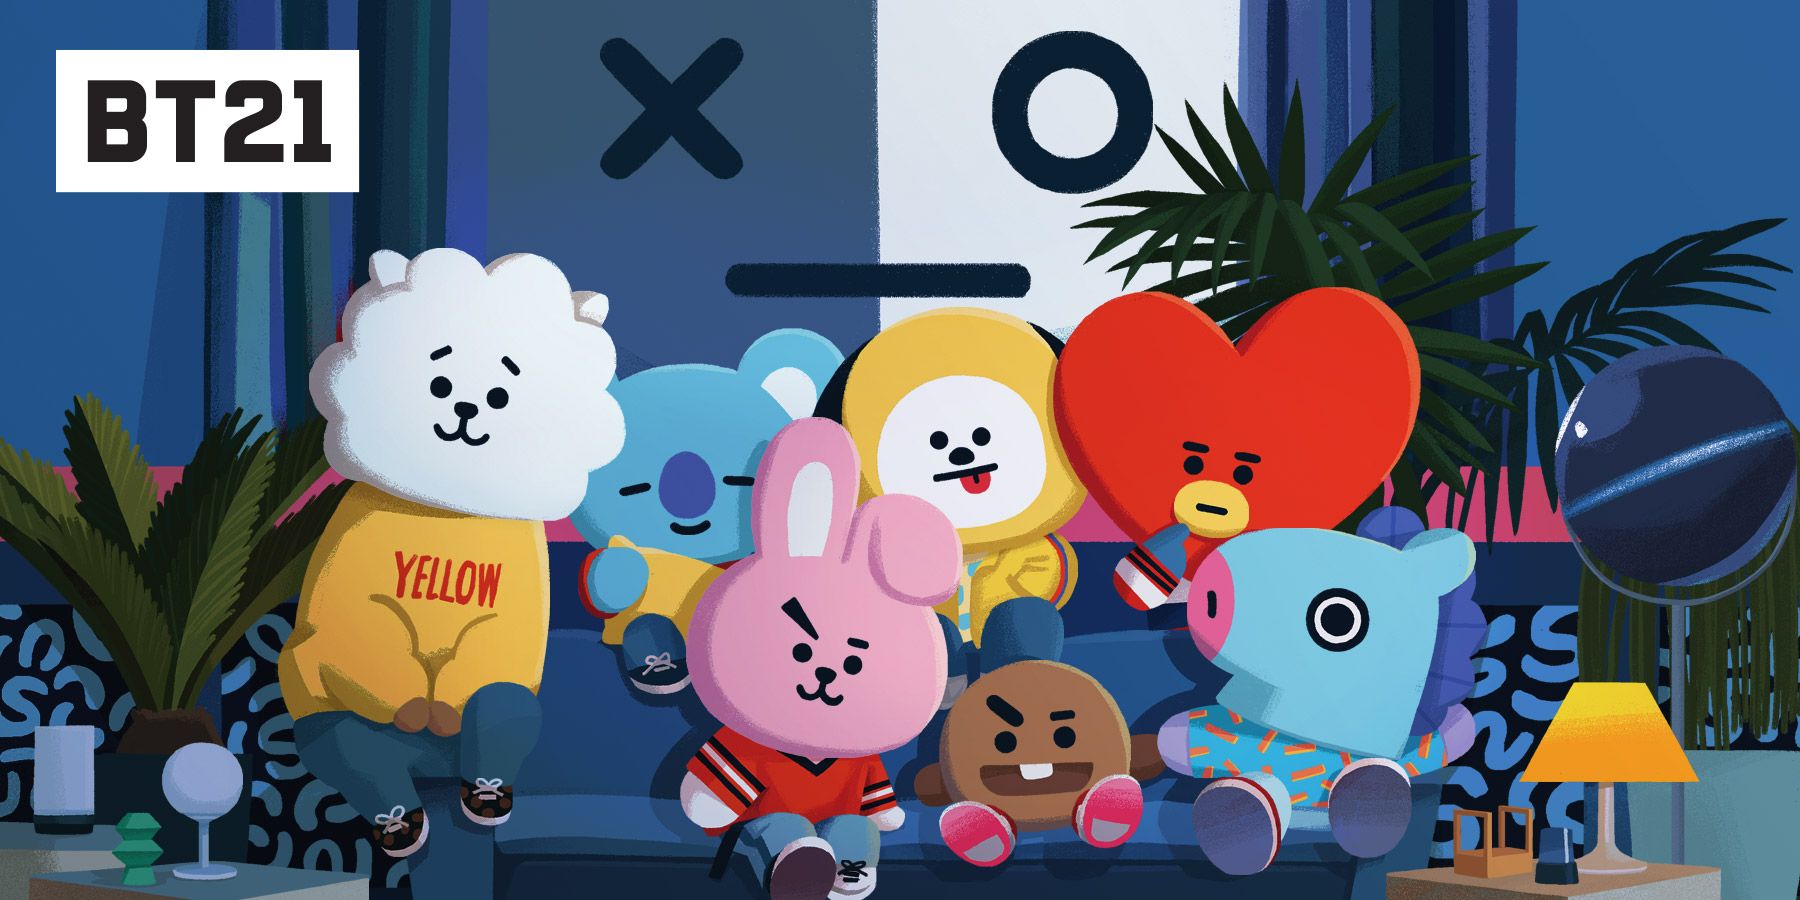 LINE FRIENDS BT21 Commemorates ThreeMillion Follower Milestone On Twitter  With Special Discount